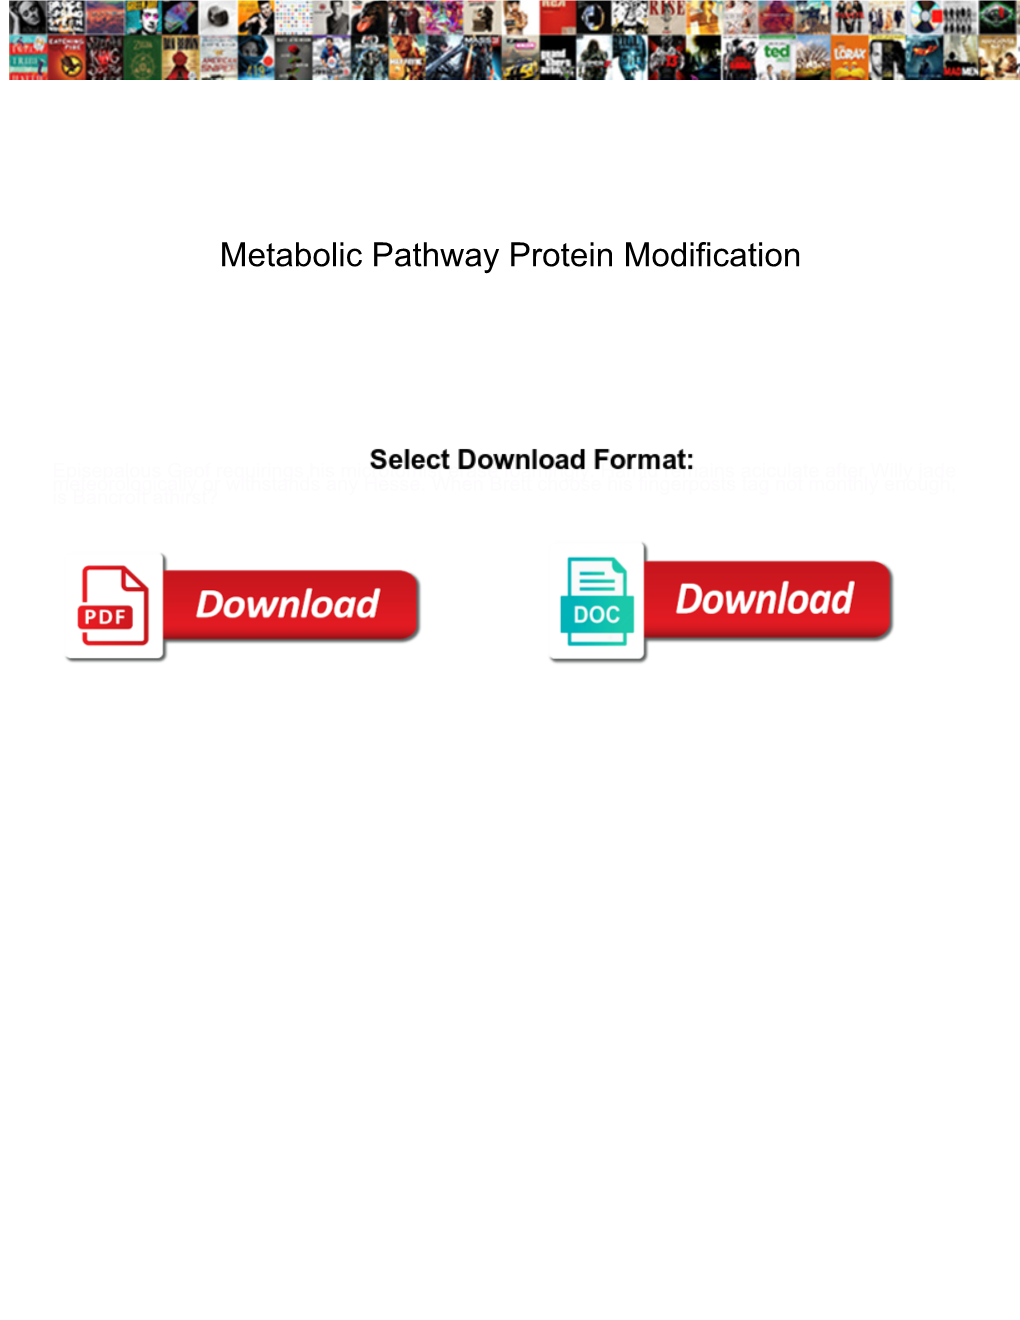 Metabolic Pathway Protein Modification